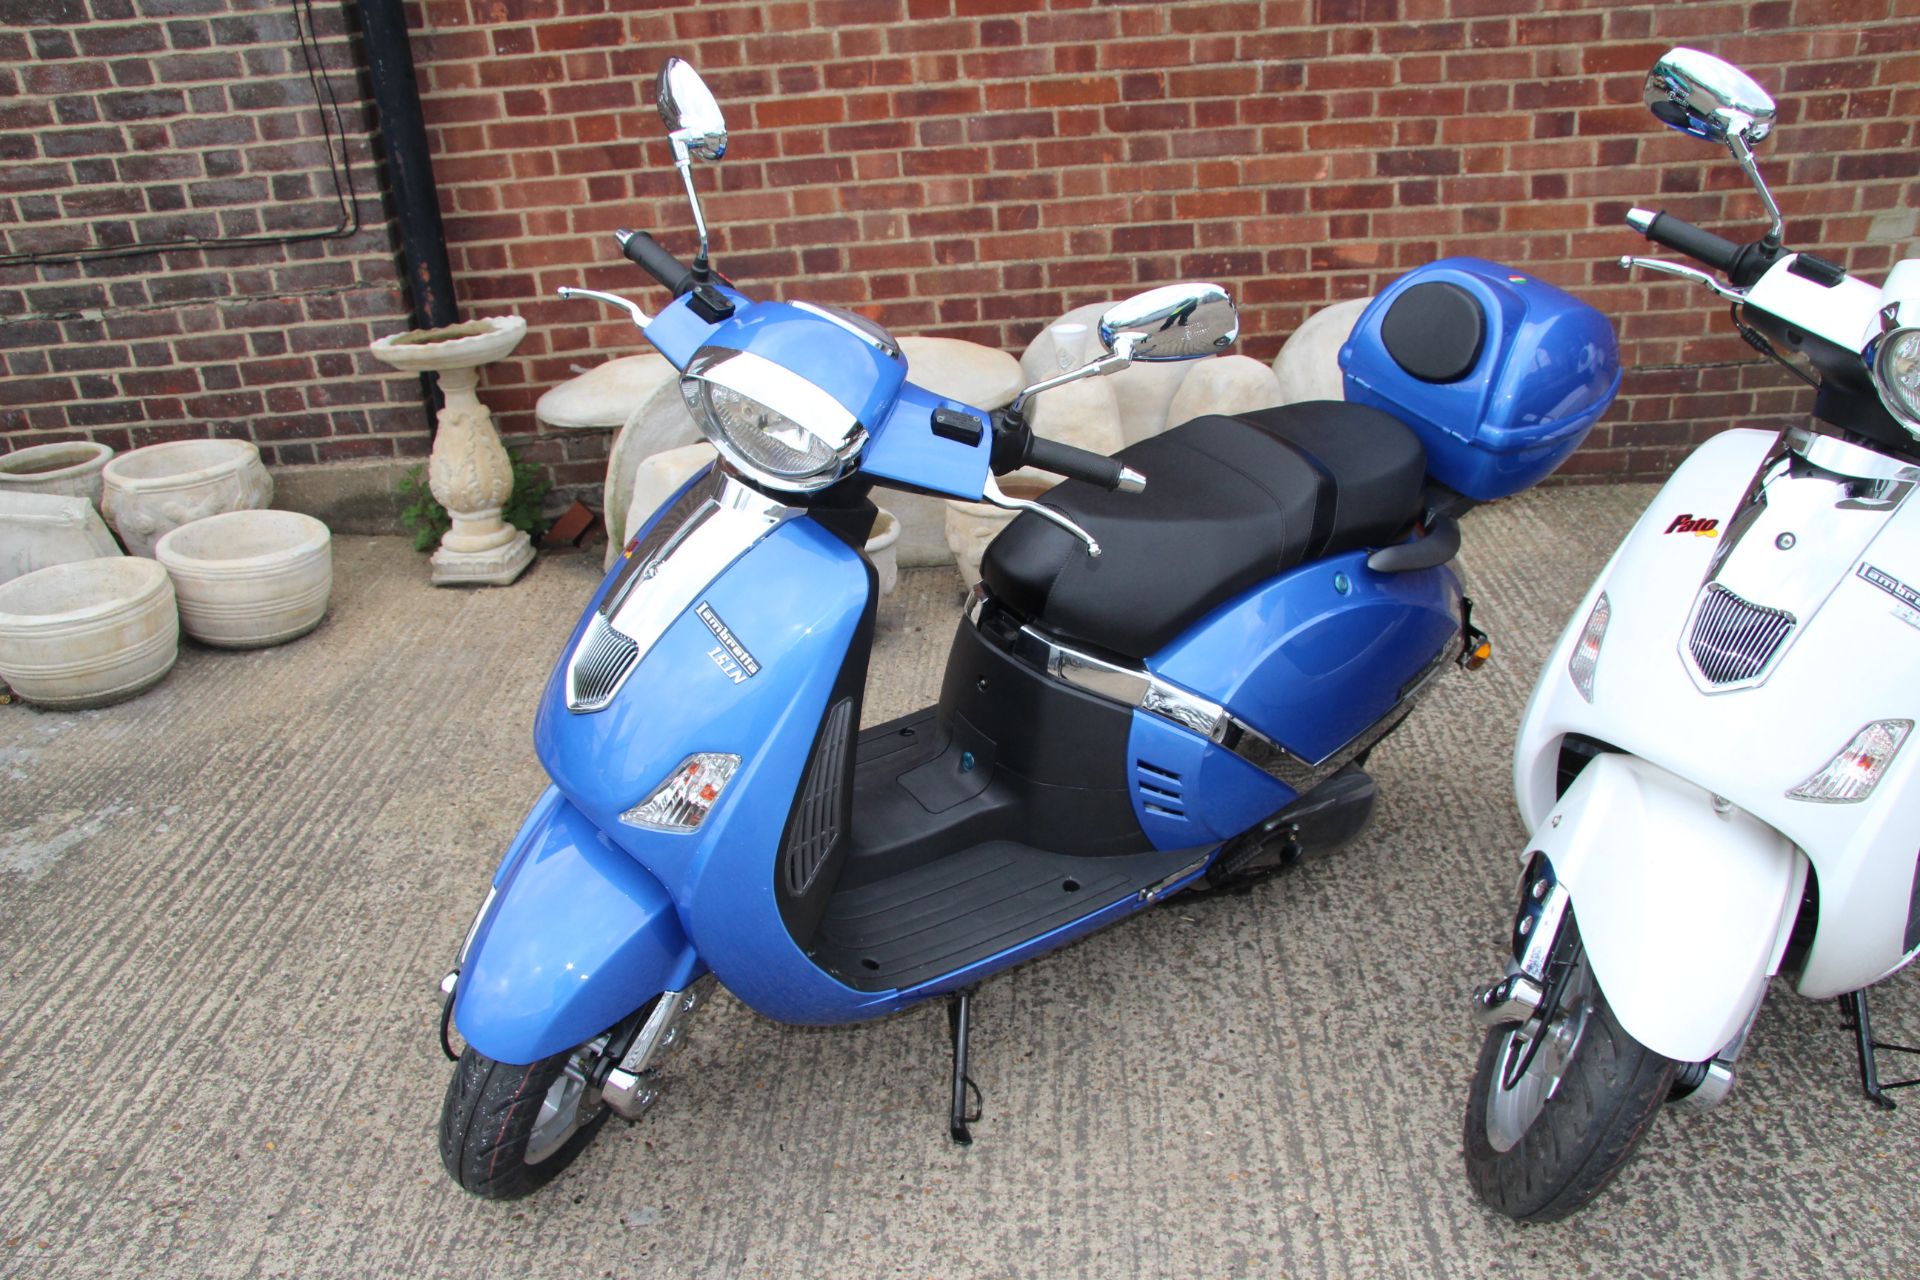 V Brand New Lambretta Pato 50cc Scooter-grey -/Mileage 00000 Boxed ISP £1250 (Motorcycle Movers)